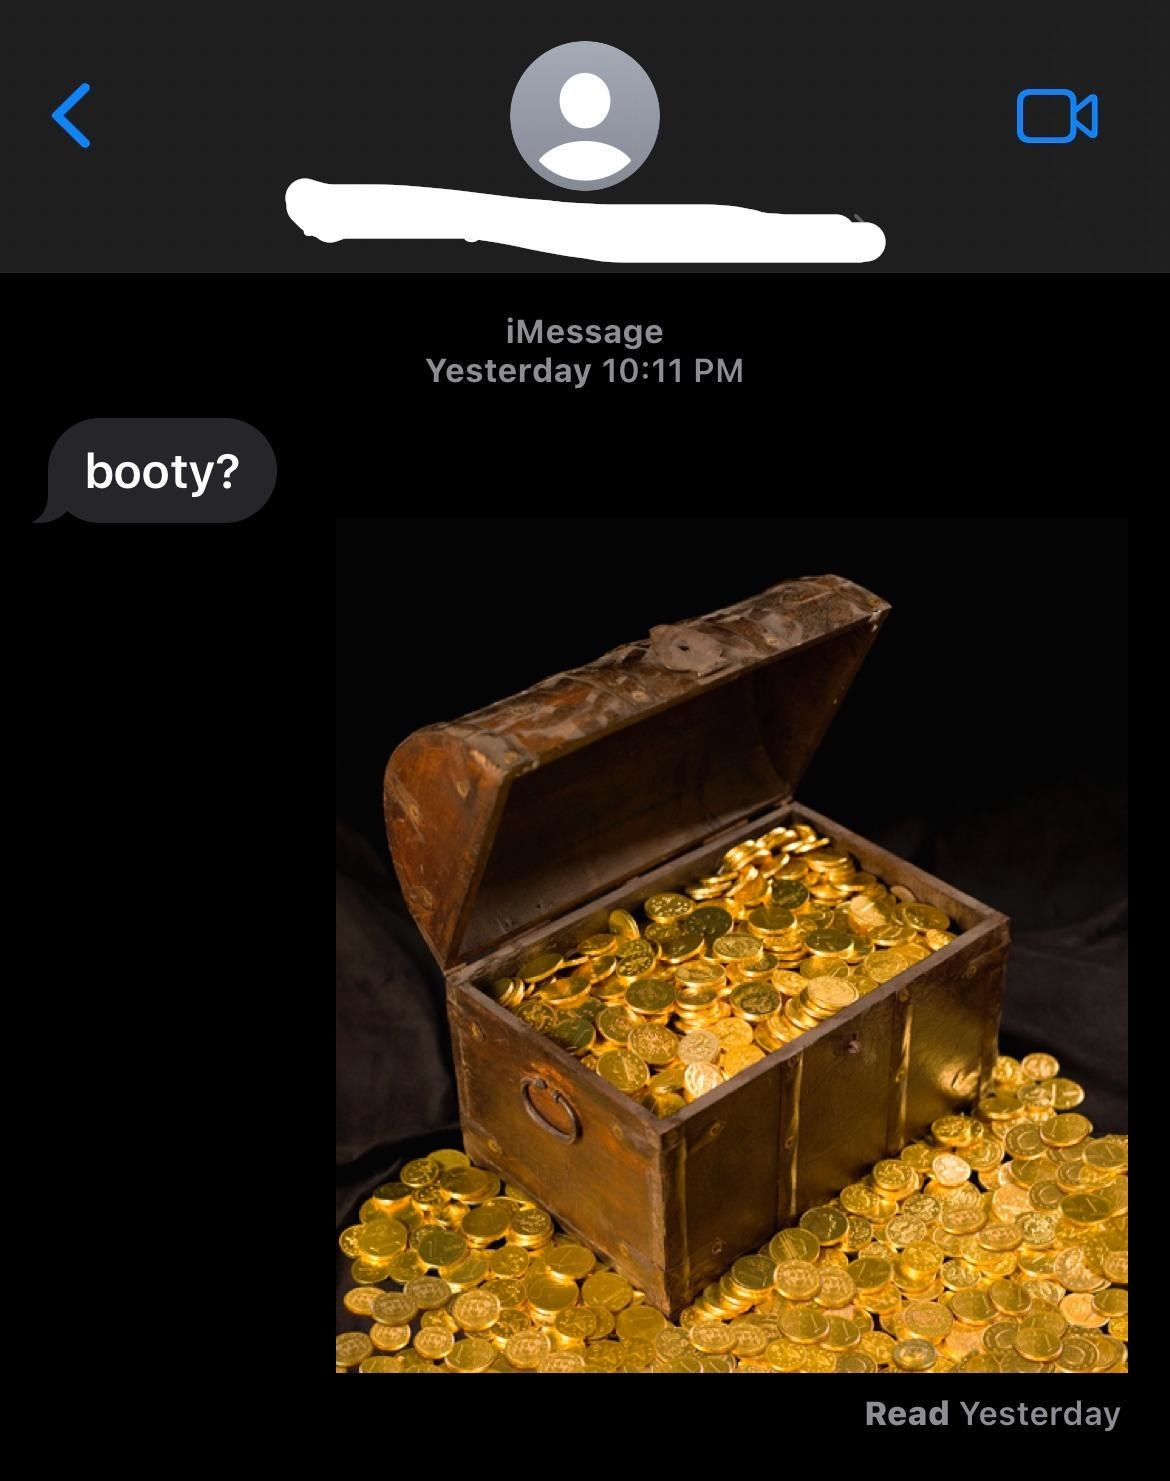 wrong number text where someone asks booty and gets sent a treasure chest